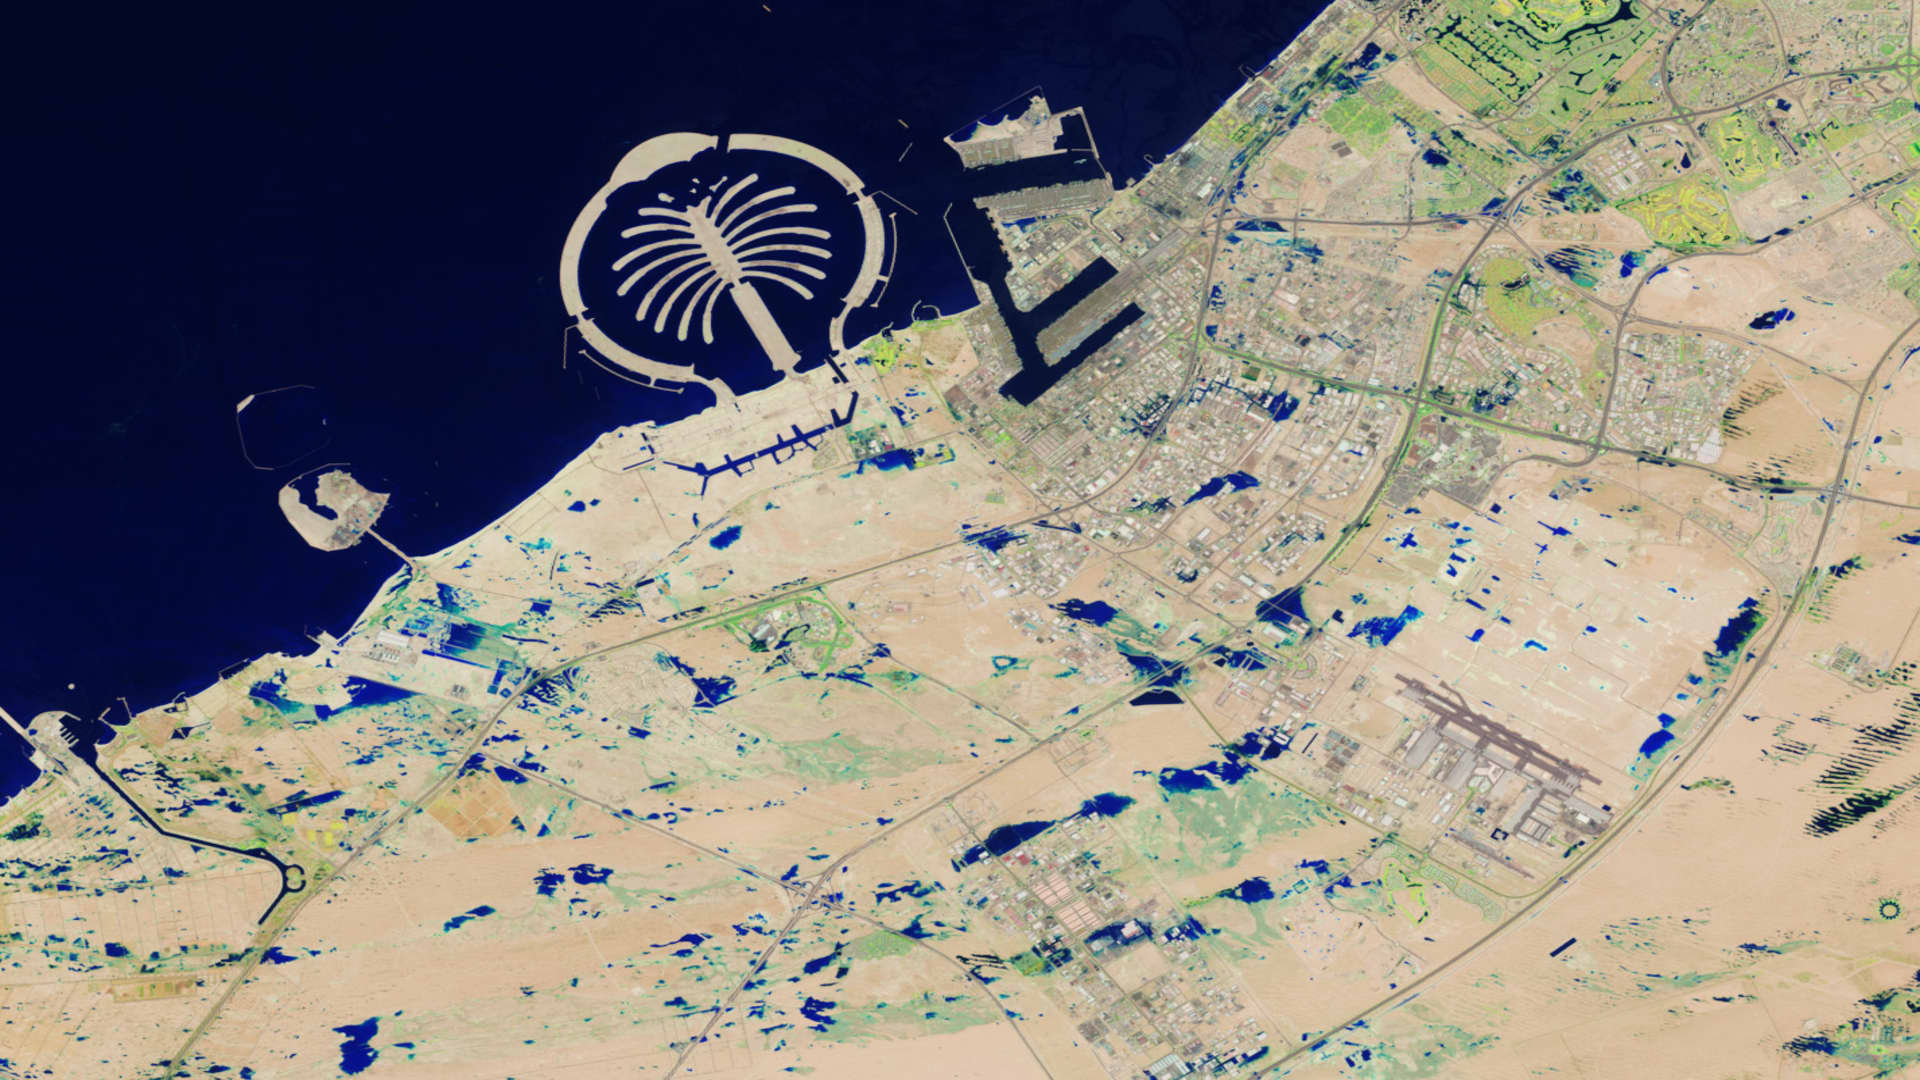 Pre and Post Storm Satellite Images of Dubai